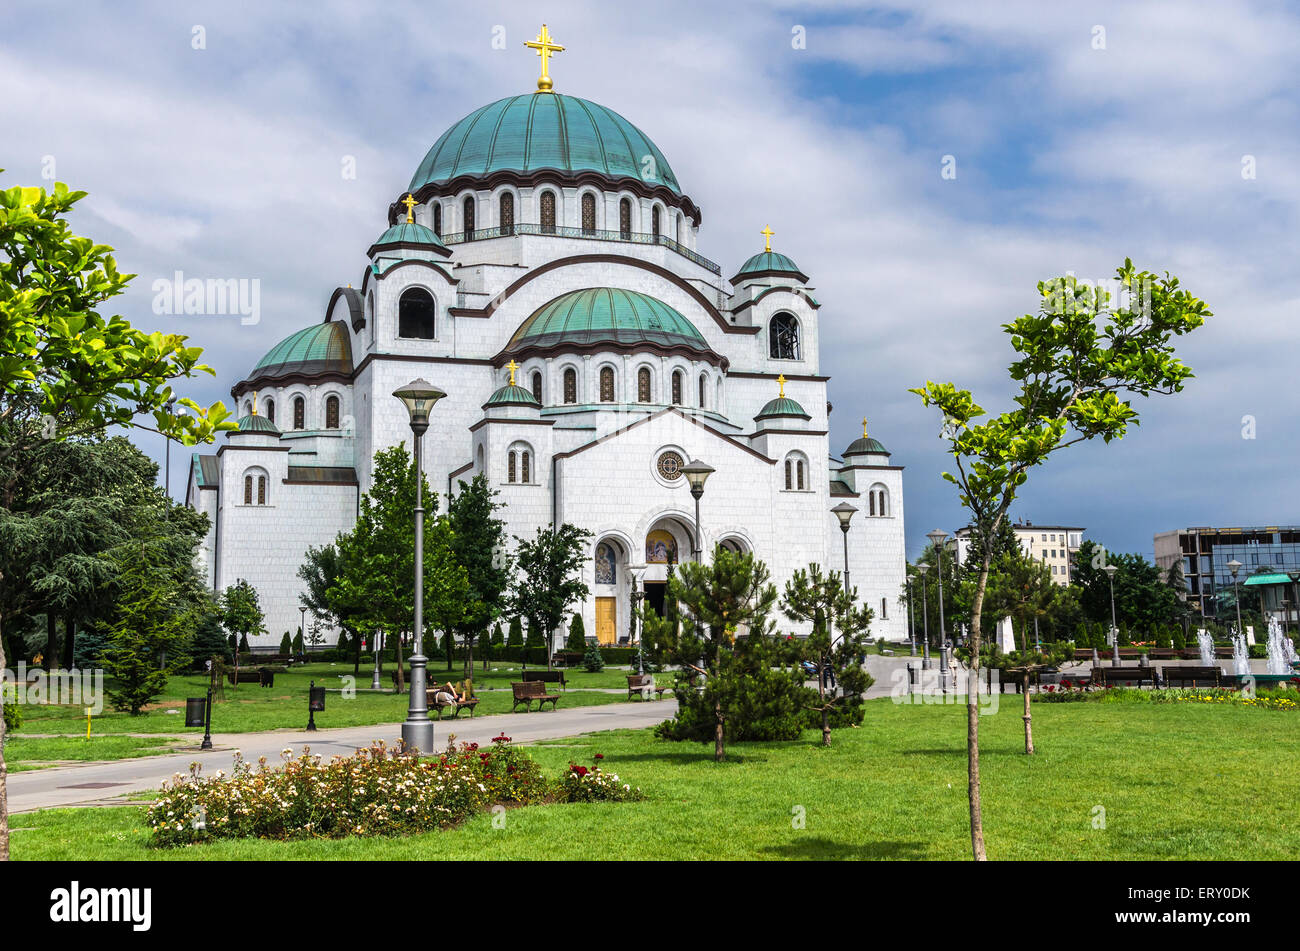 St. Sava church is the largest Orthodox church in the world located on the Vracar plateau Stock Photo